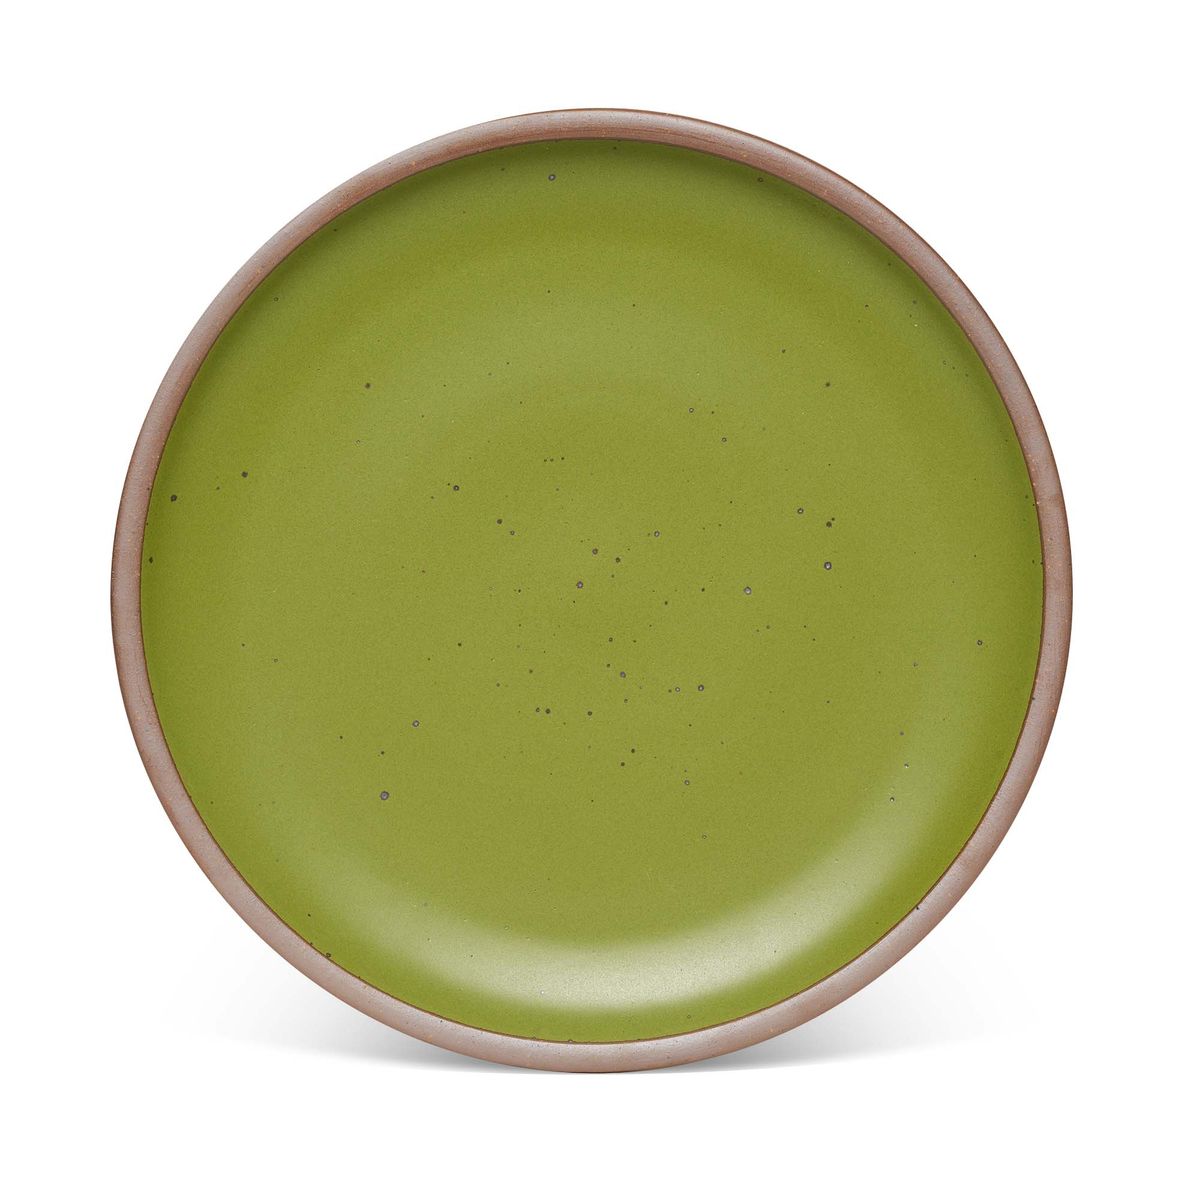 The Serving Platter in Fiddlehead, a mossy, olive green.